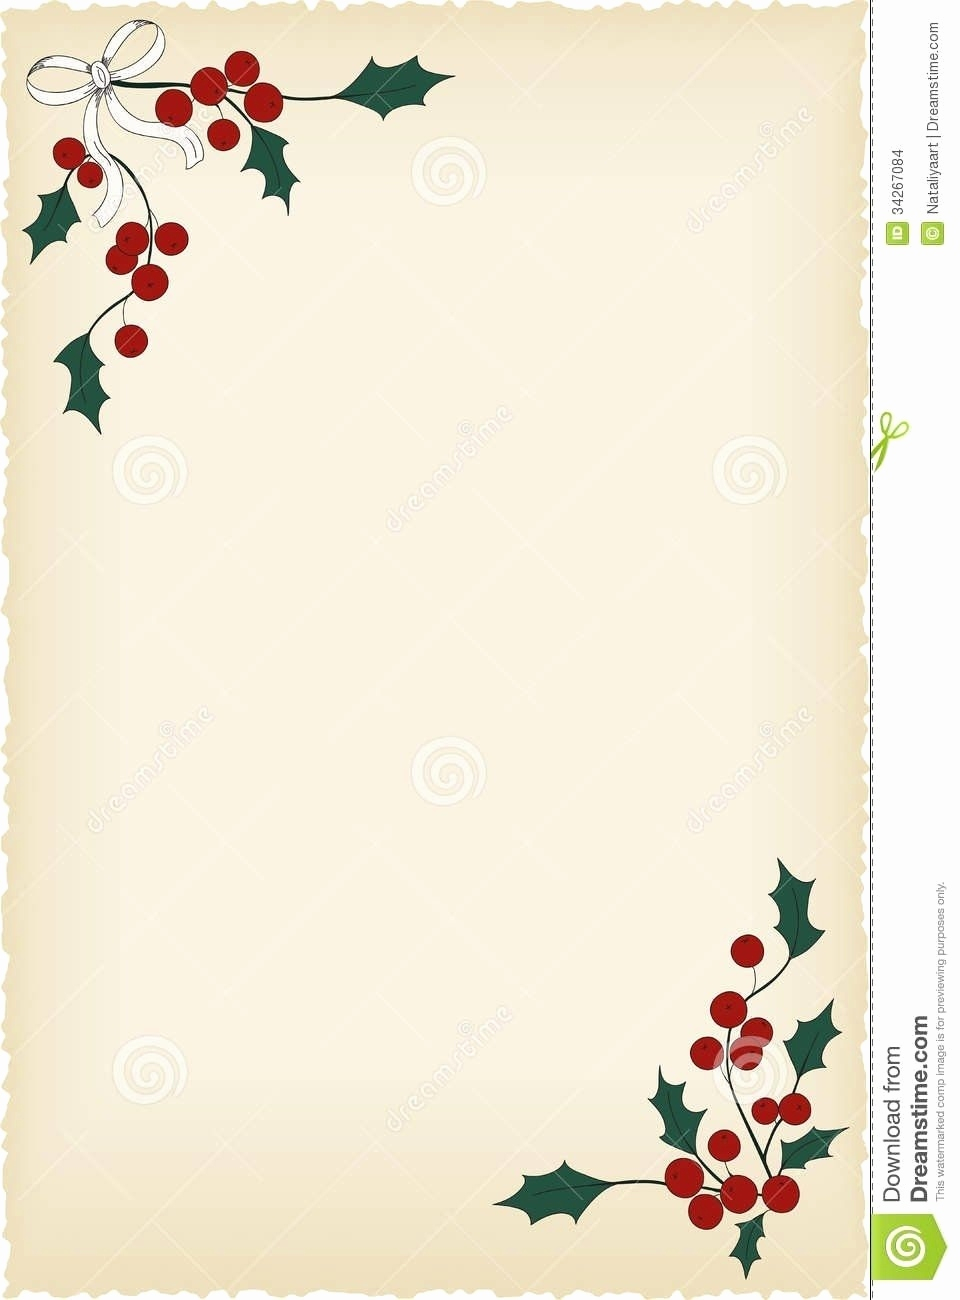 Christmas Letter Background Template - Christmas Letter Backgrounds for Free Acurnamedia